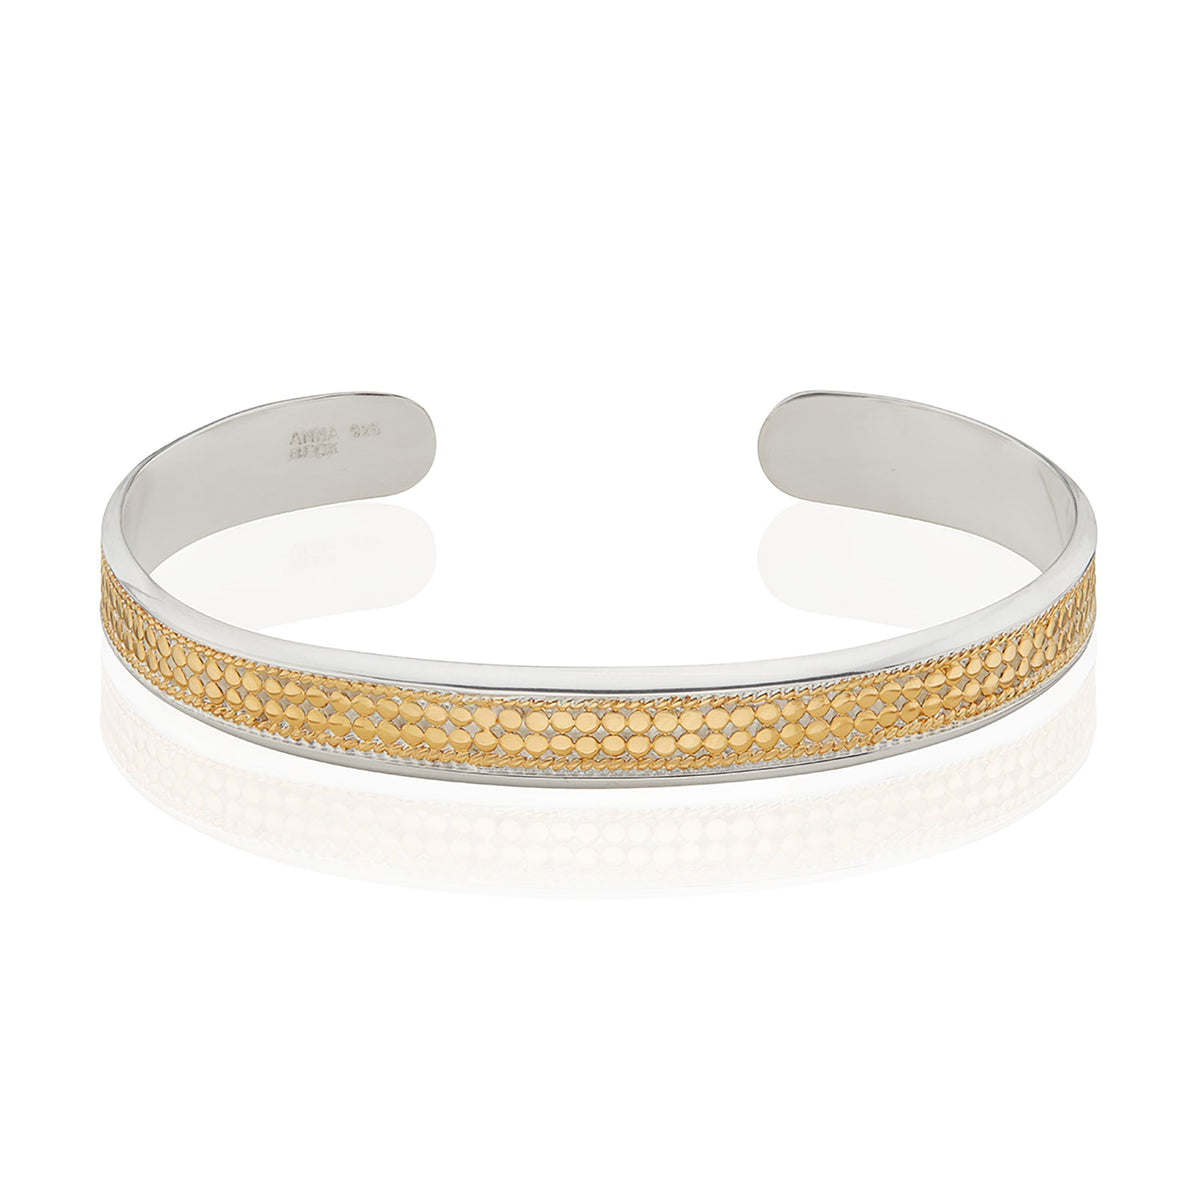 Smooth rim cuff in silver with gold dot detailing